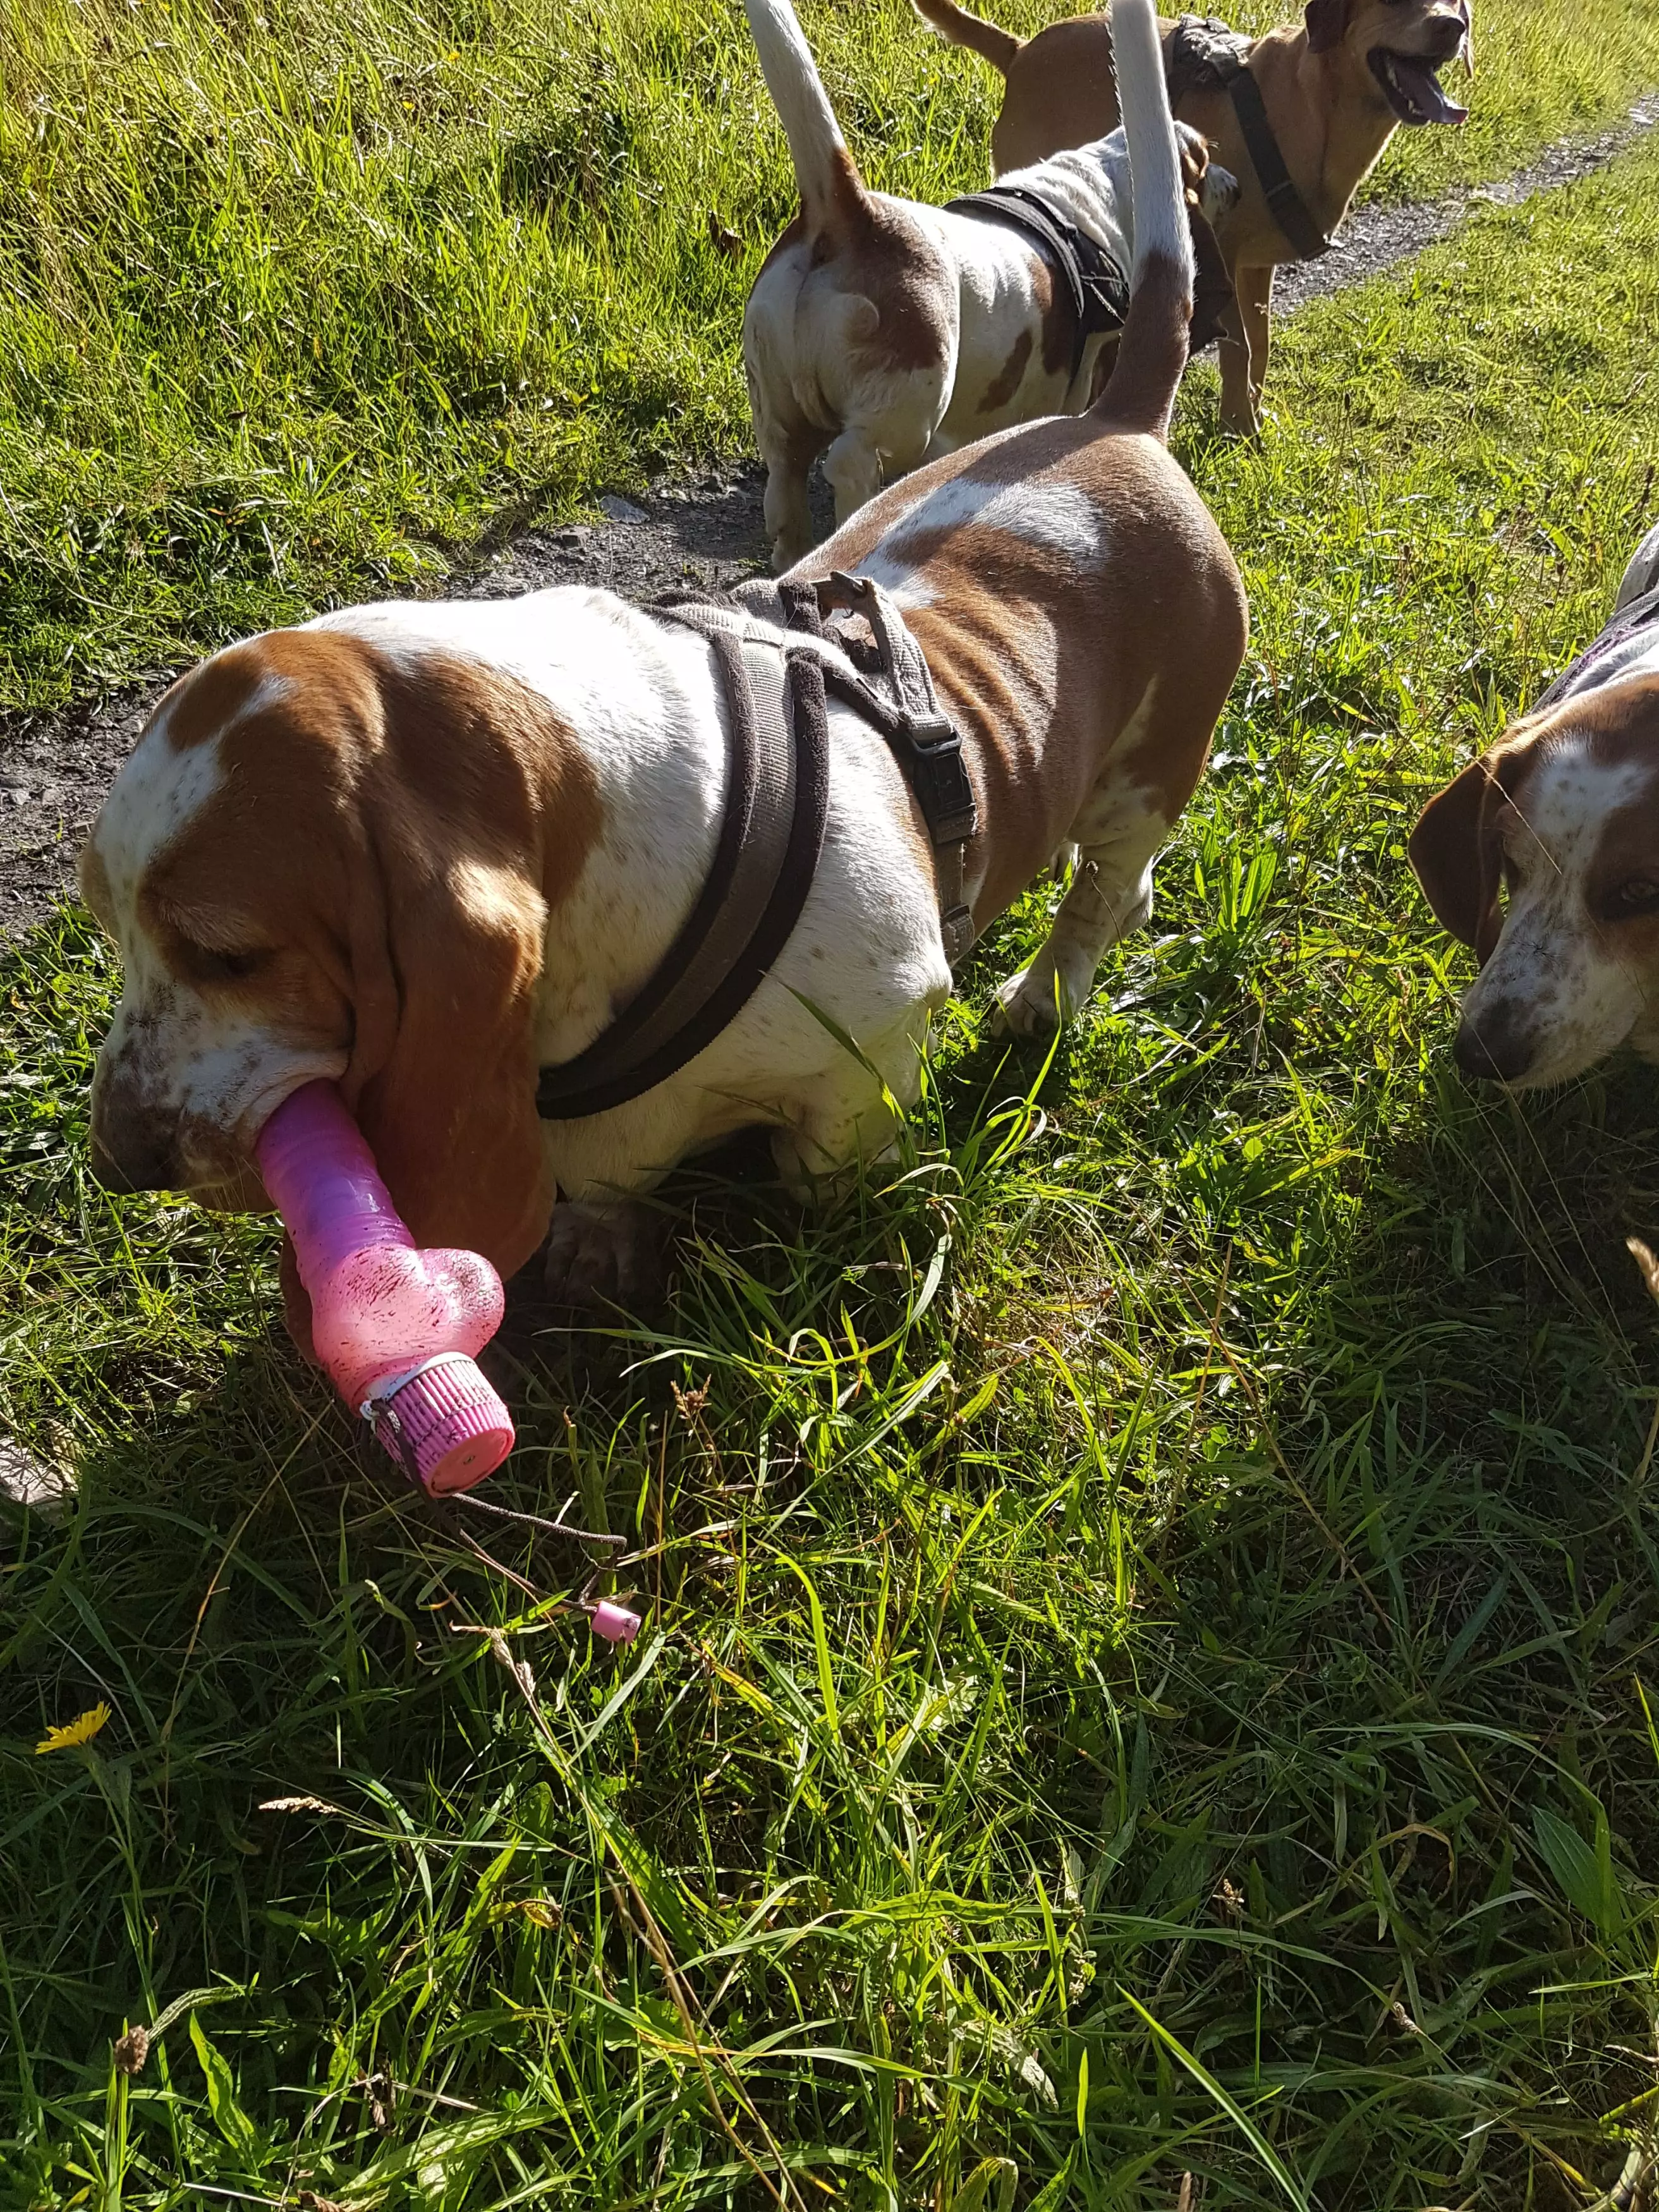 Flossie found a massive dildo and wouldn't let go.